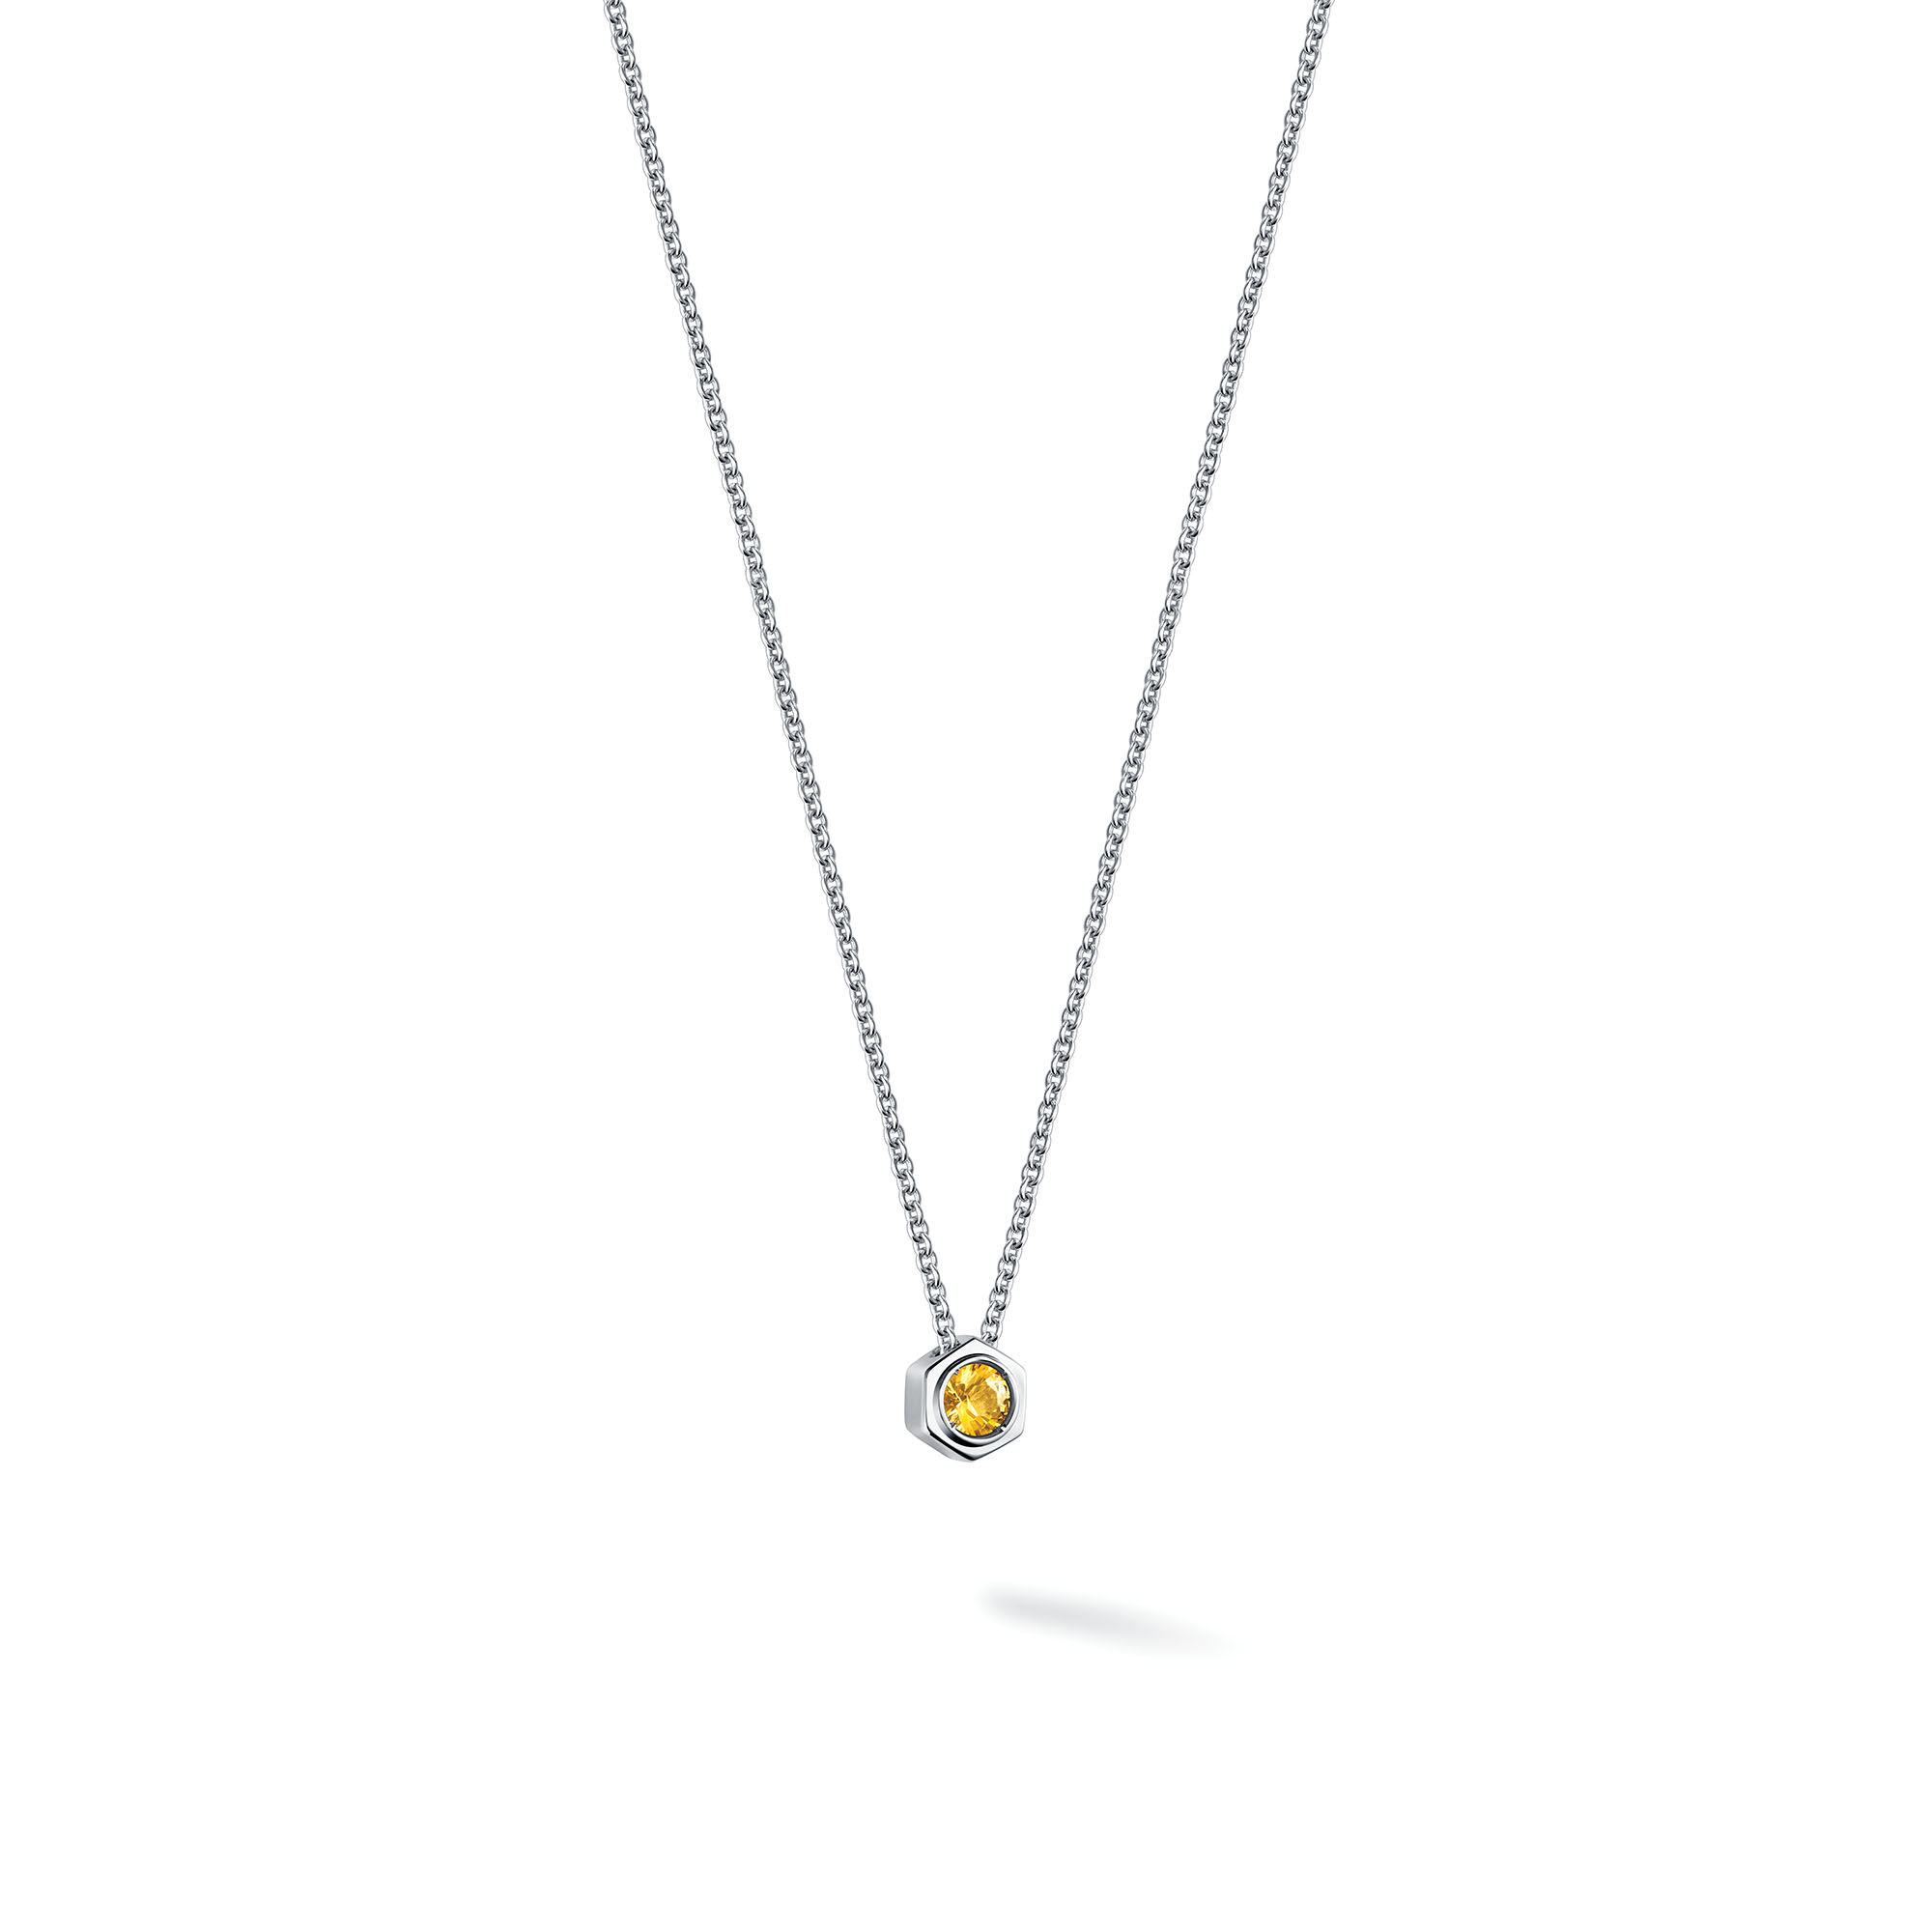 Citrine and Silver Necklace | Birks Bee Chic